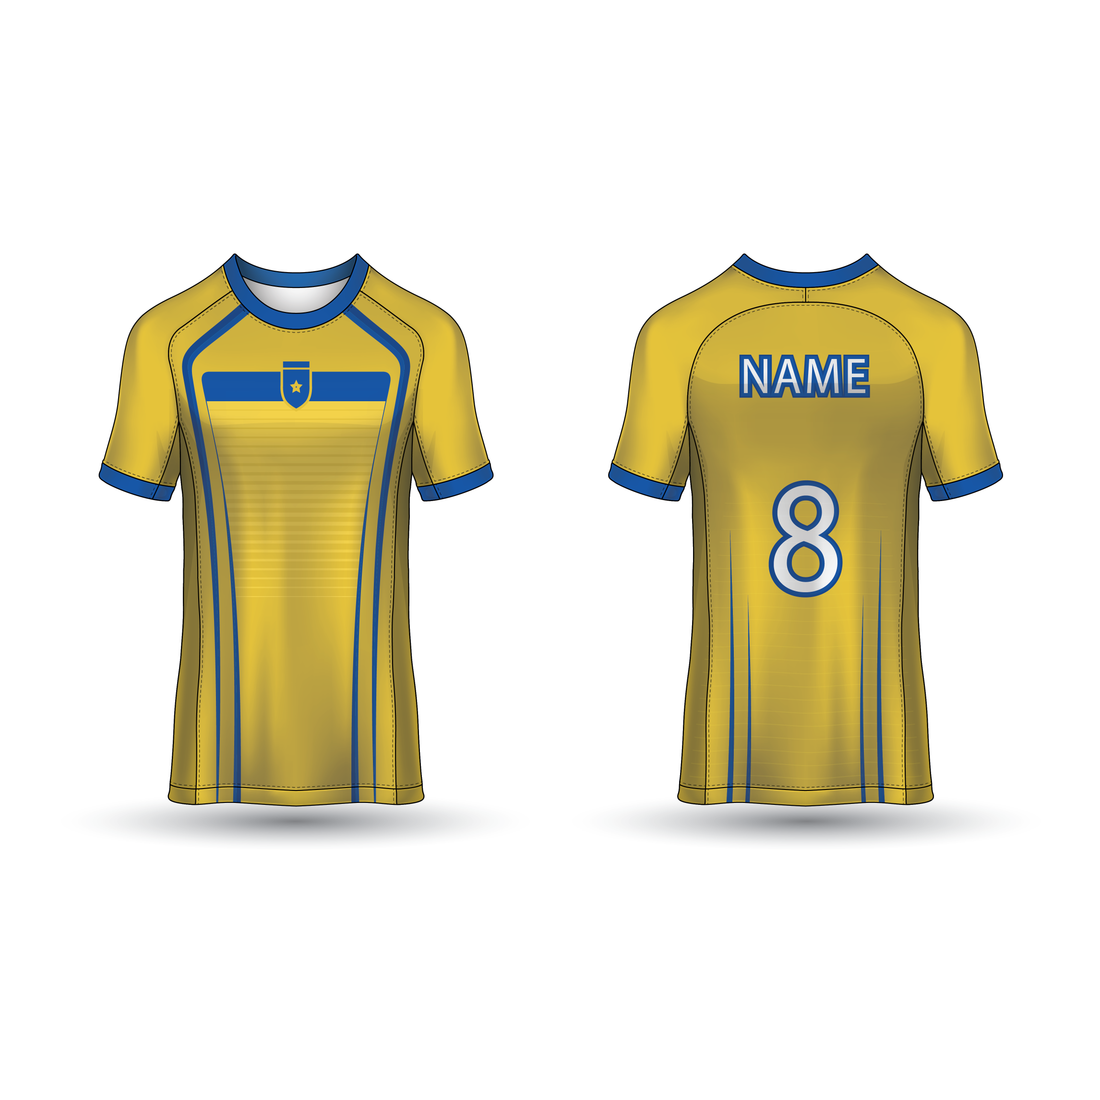 NEXT PRINT All Over Printed Customized Sublimation T-Shirt Unisex Sports Jersey Player Name & Number, Team Name NP50000245